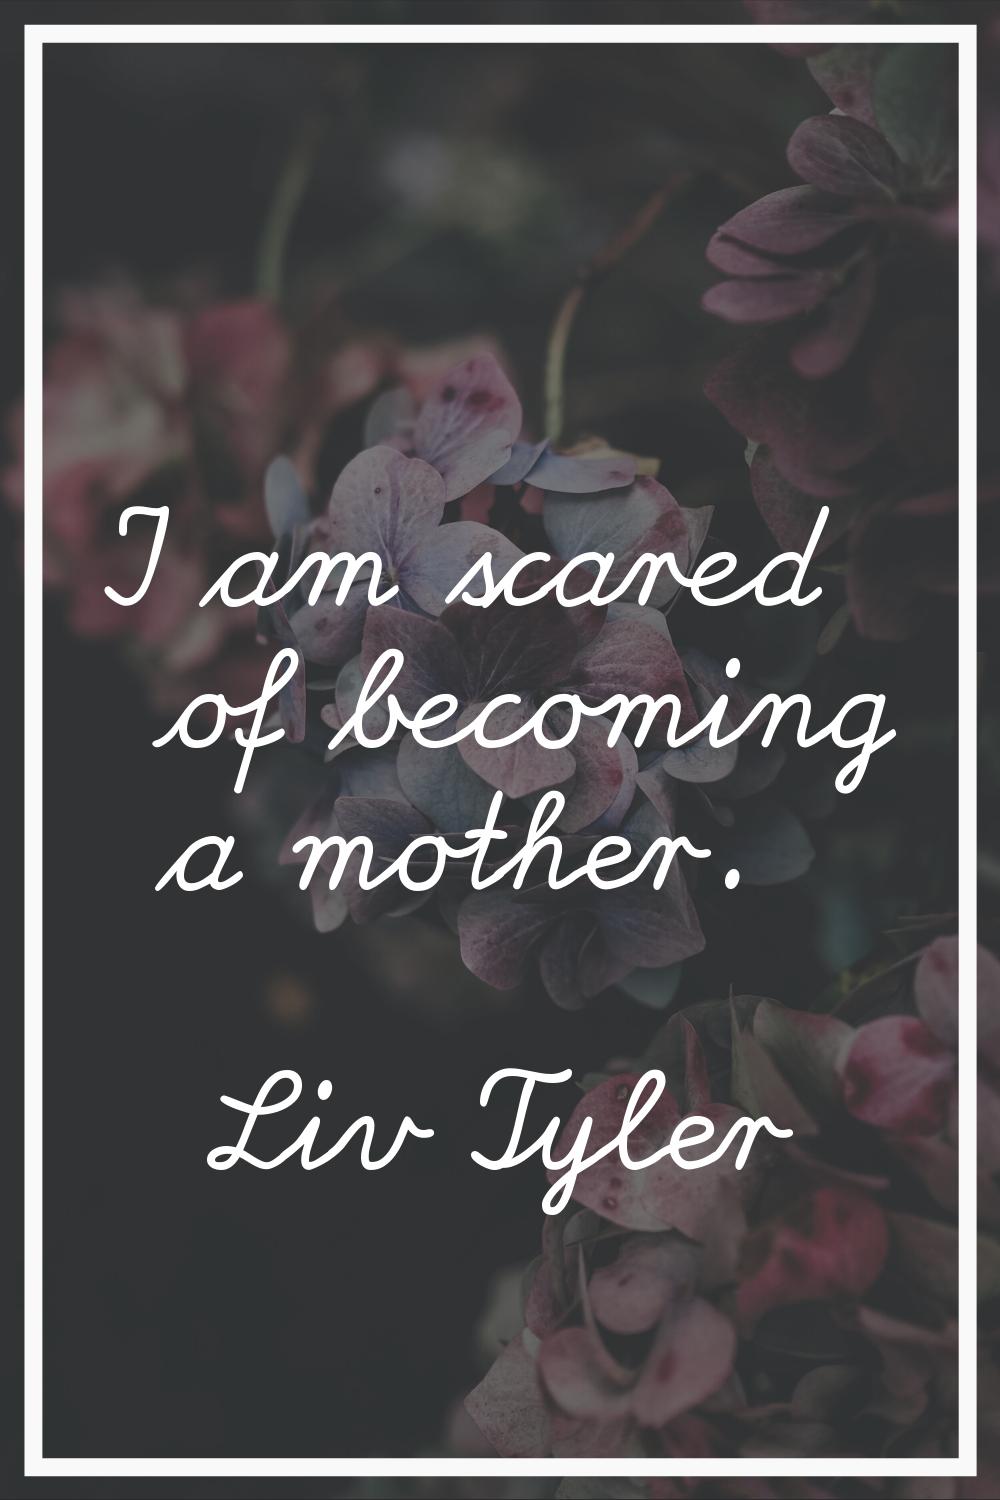 I am scared of becoming a mother.